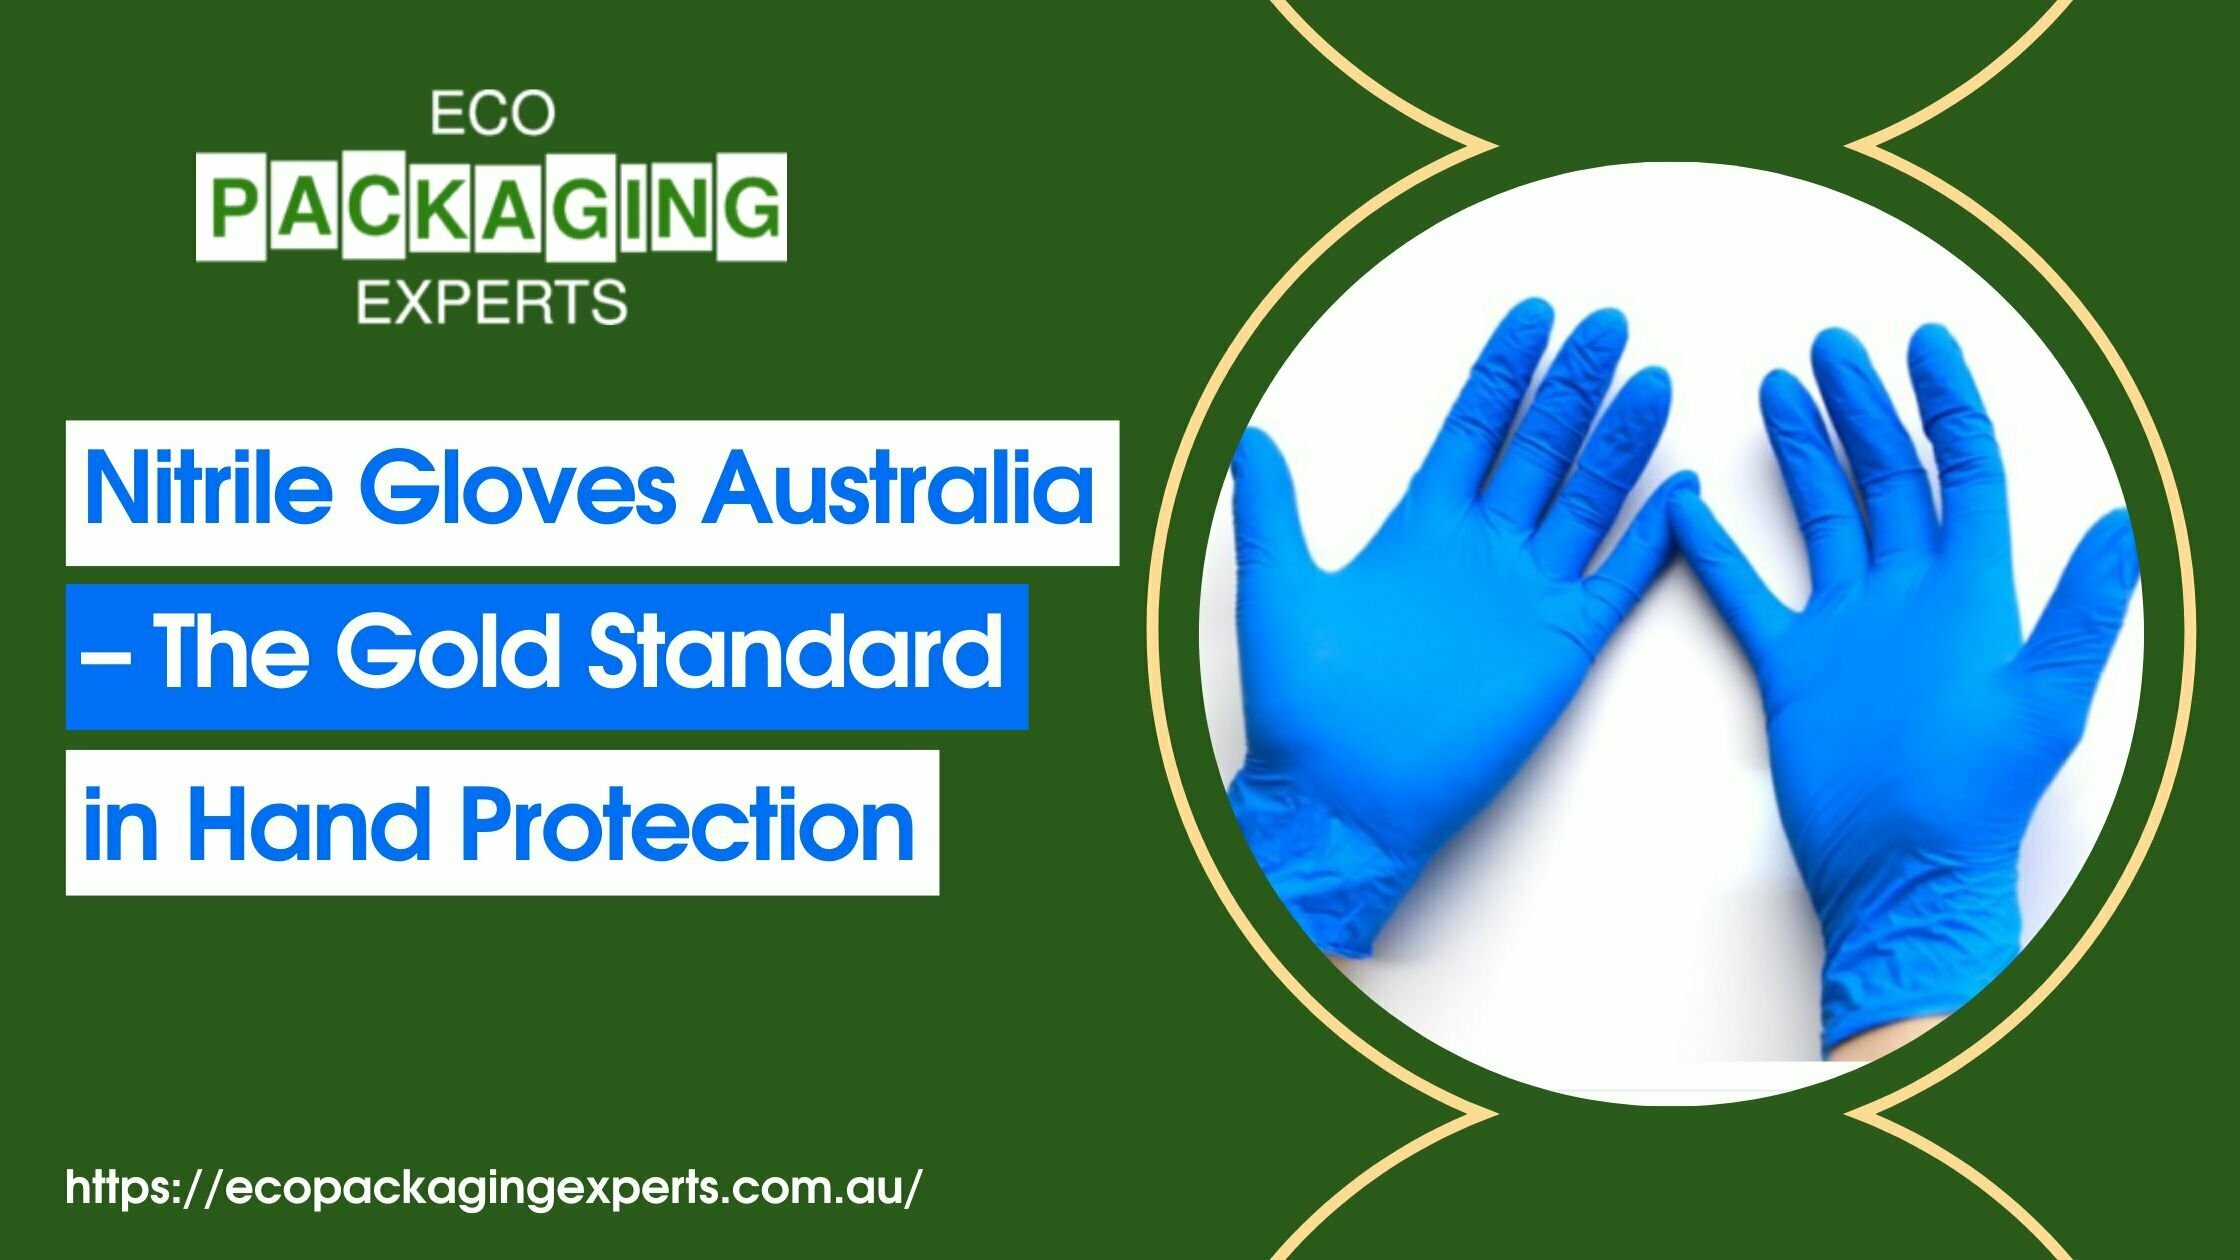 Nitrile Gloves Australia - The Gold Standard in Hand Protection - Eco Packaging Experts